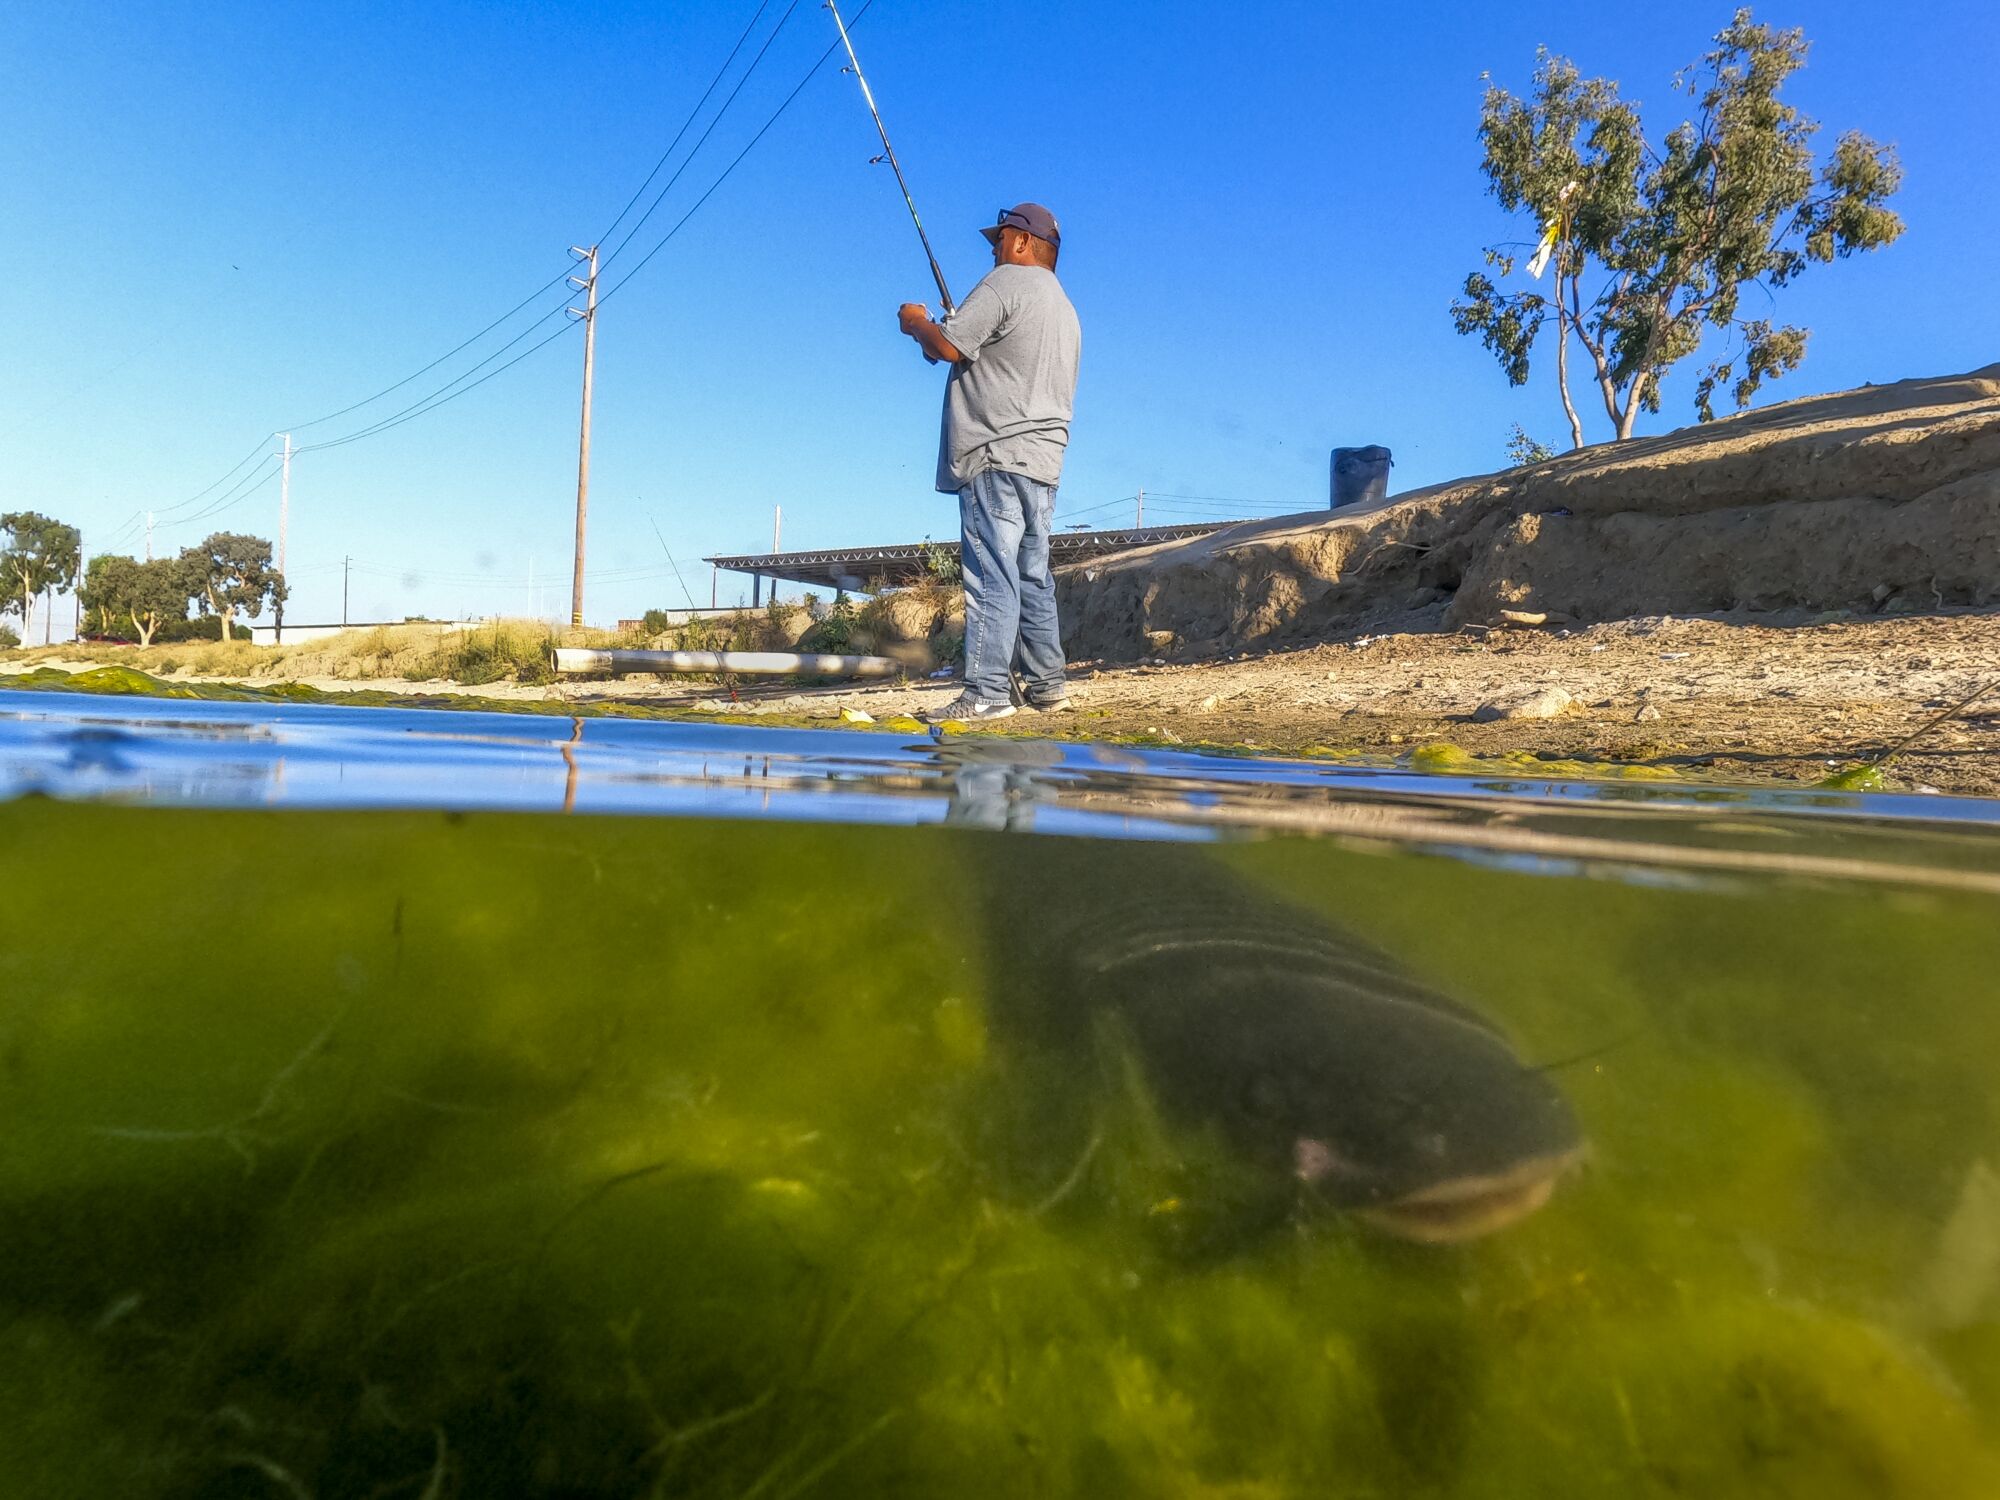 A catfish on a string is visible underwater at Santa Ana River Lakes in Anaheim